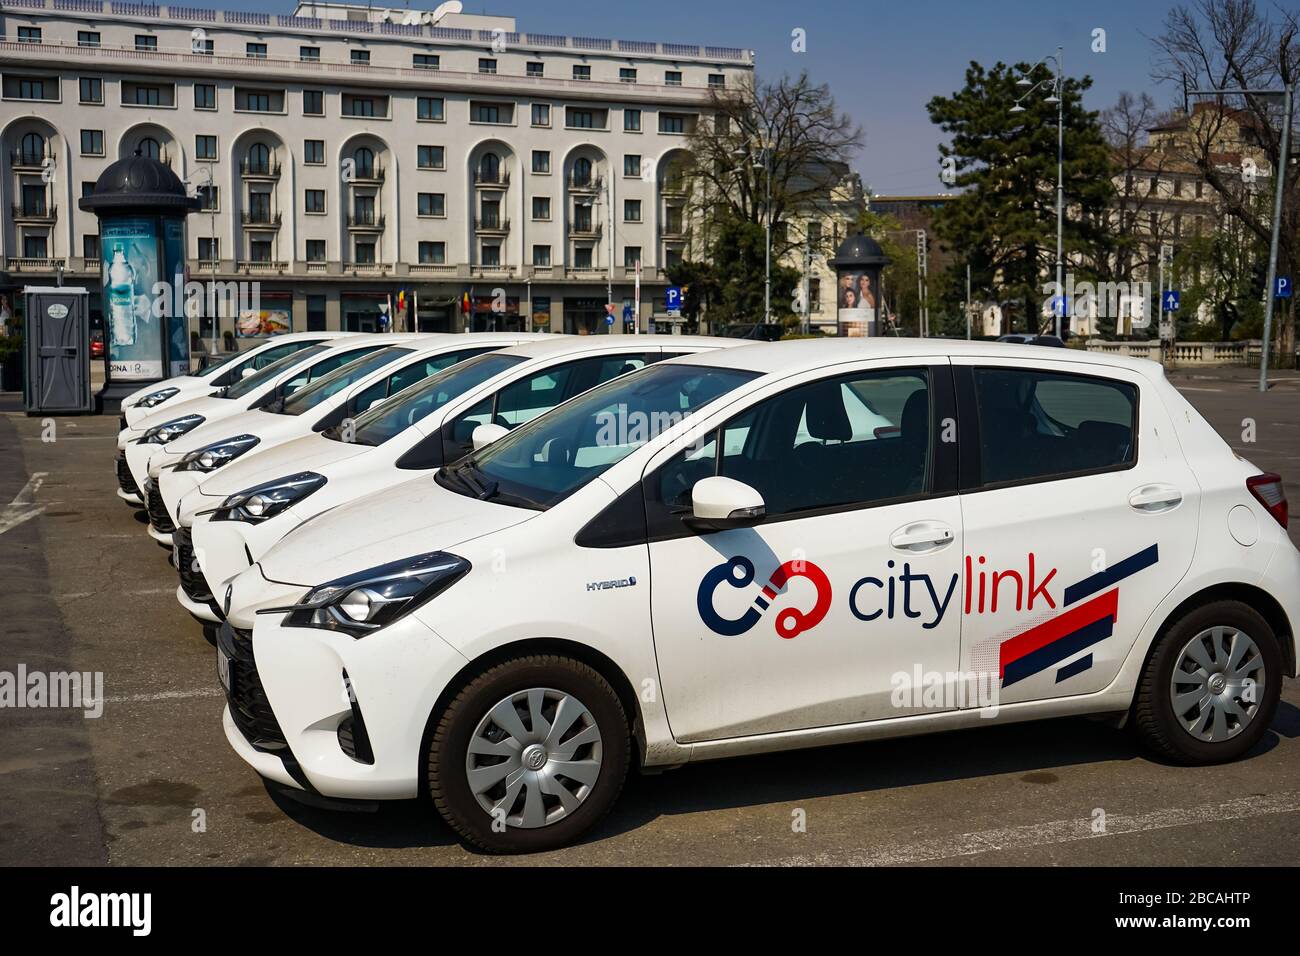 Bucharest, Romania - March 30, 2020: Several Toyota Yaris Hybrid cars belonging to the Romanian renting car service Citylink are parked waiting for cu Stock Photo